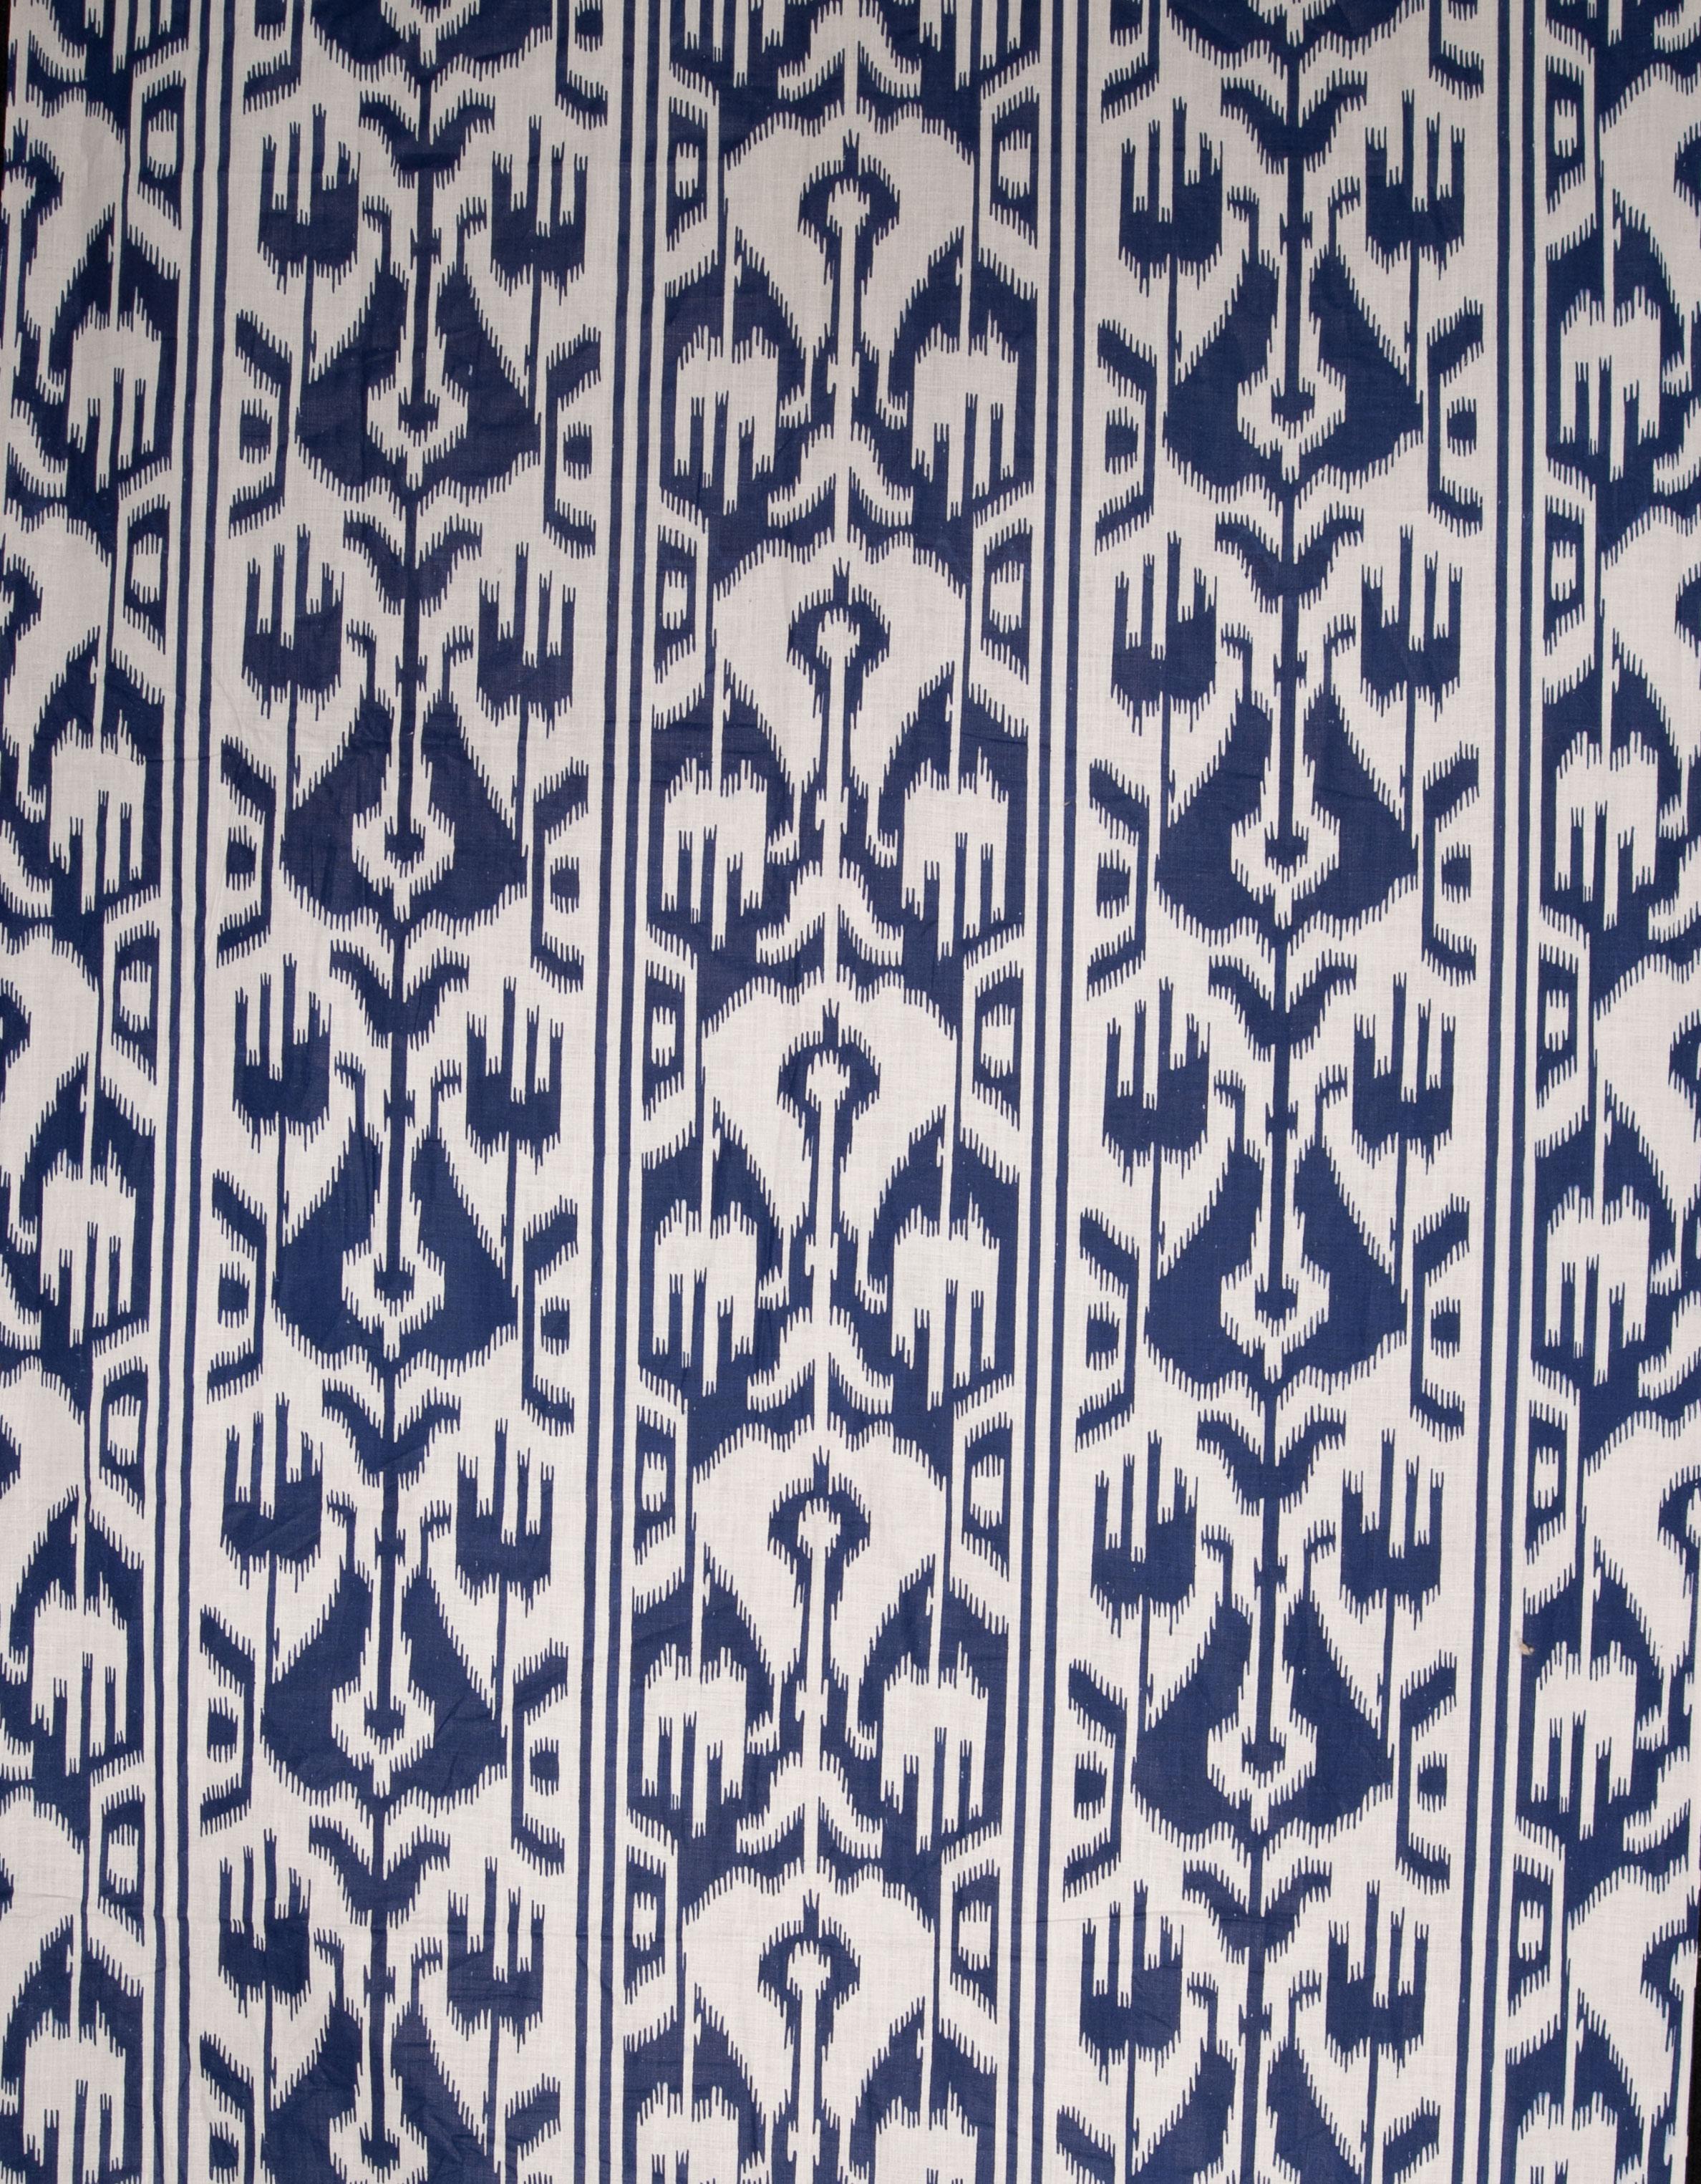 These type of Russian prints that are also called 'trade cloth' since they were made for Central Asian markets. They were used to make blankets and dresses, and also used for the lining of ikat chapans.